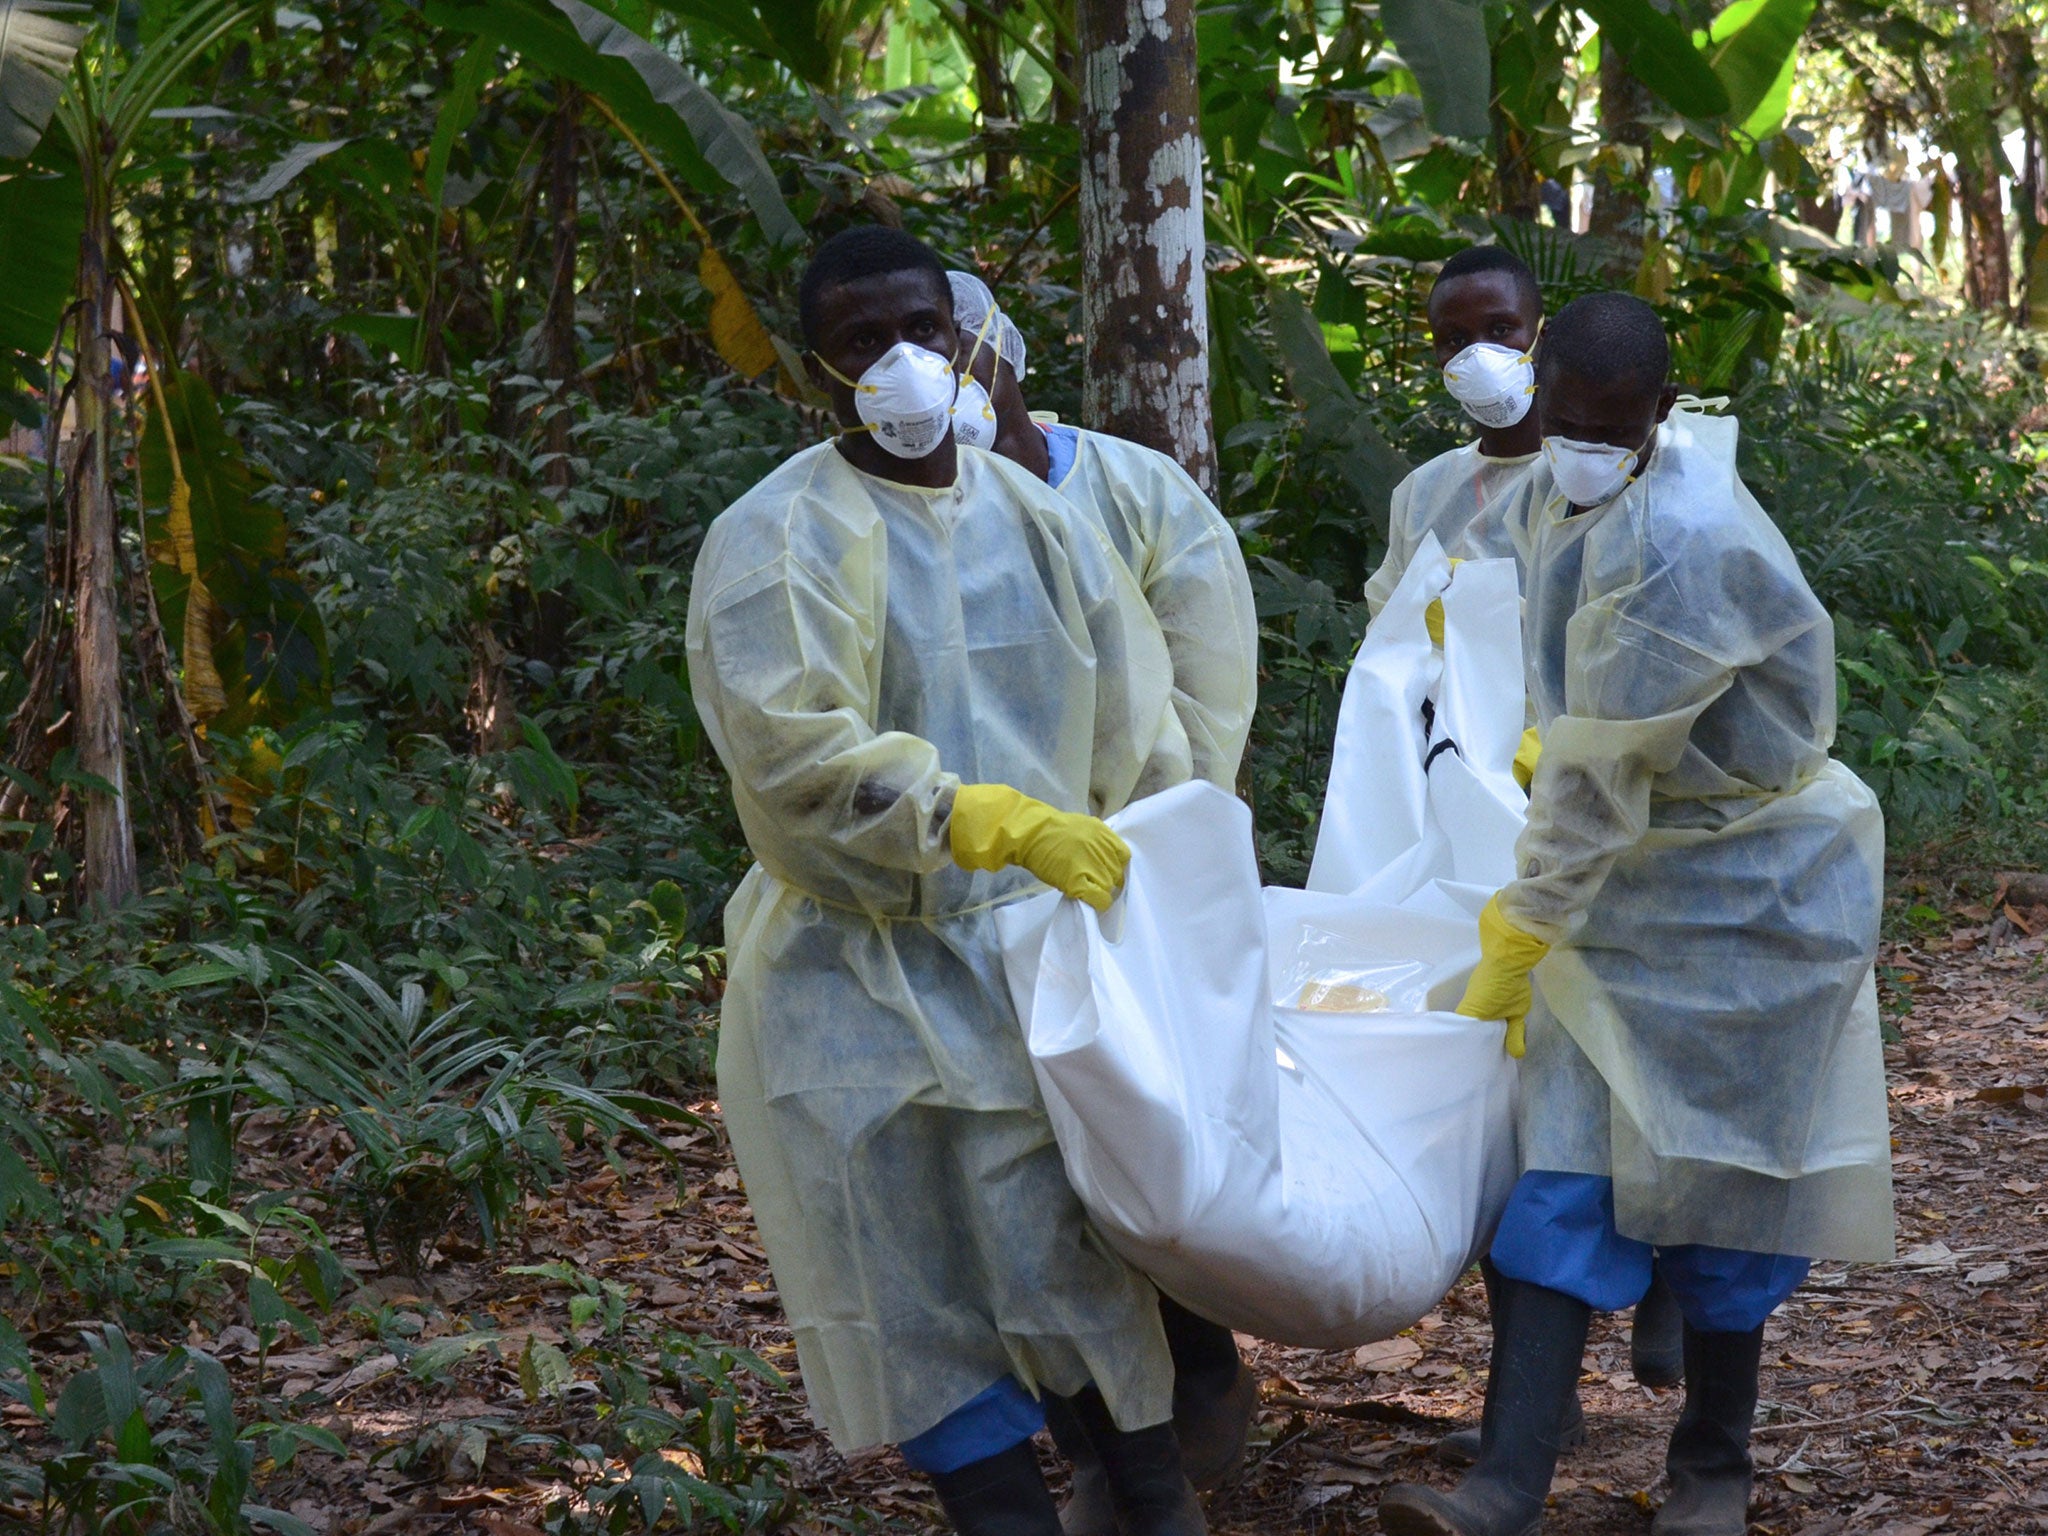 Red Cross workers with the body of an Ebola victim in the Liberian capital, Monrovia